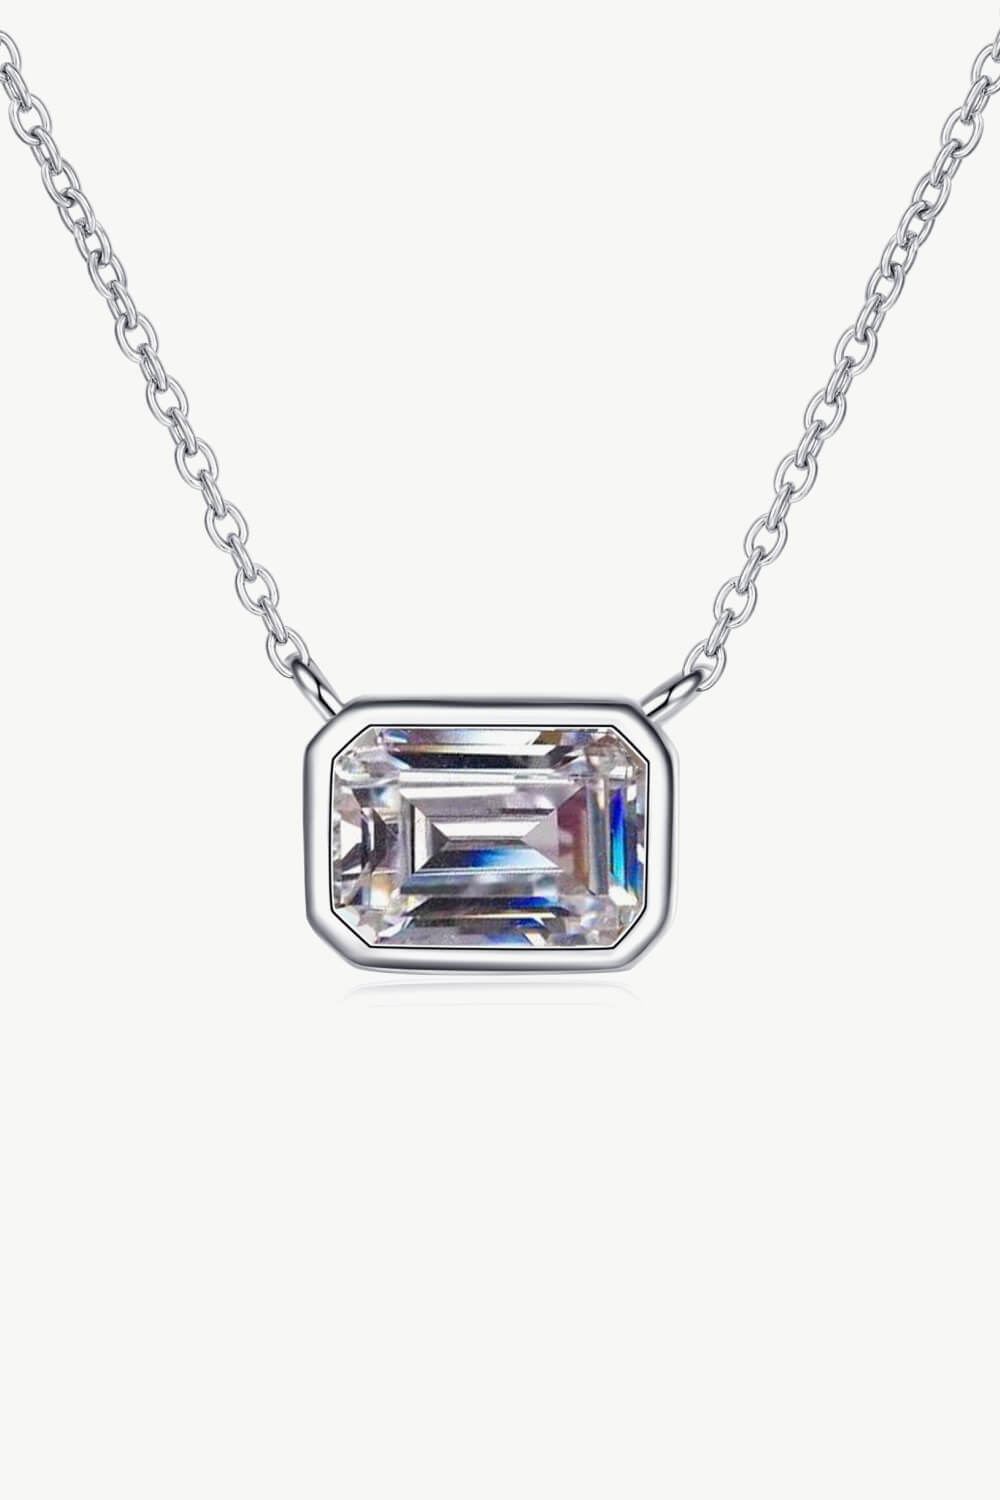 Beautiful Words 1 Carat Moissanite Pendant Necklace - Necklaces - FITGGINS